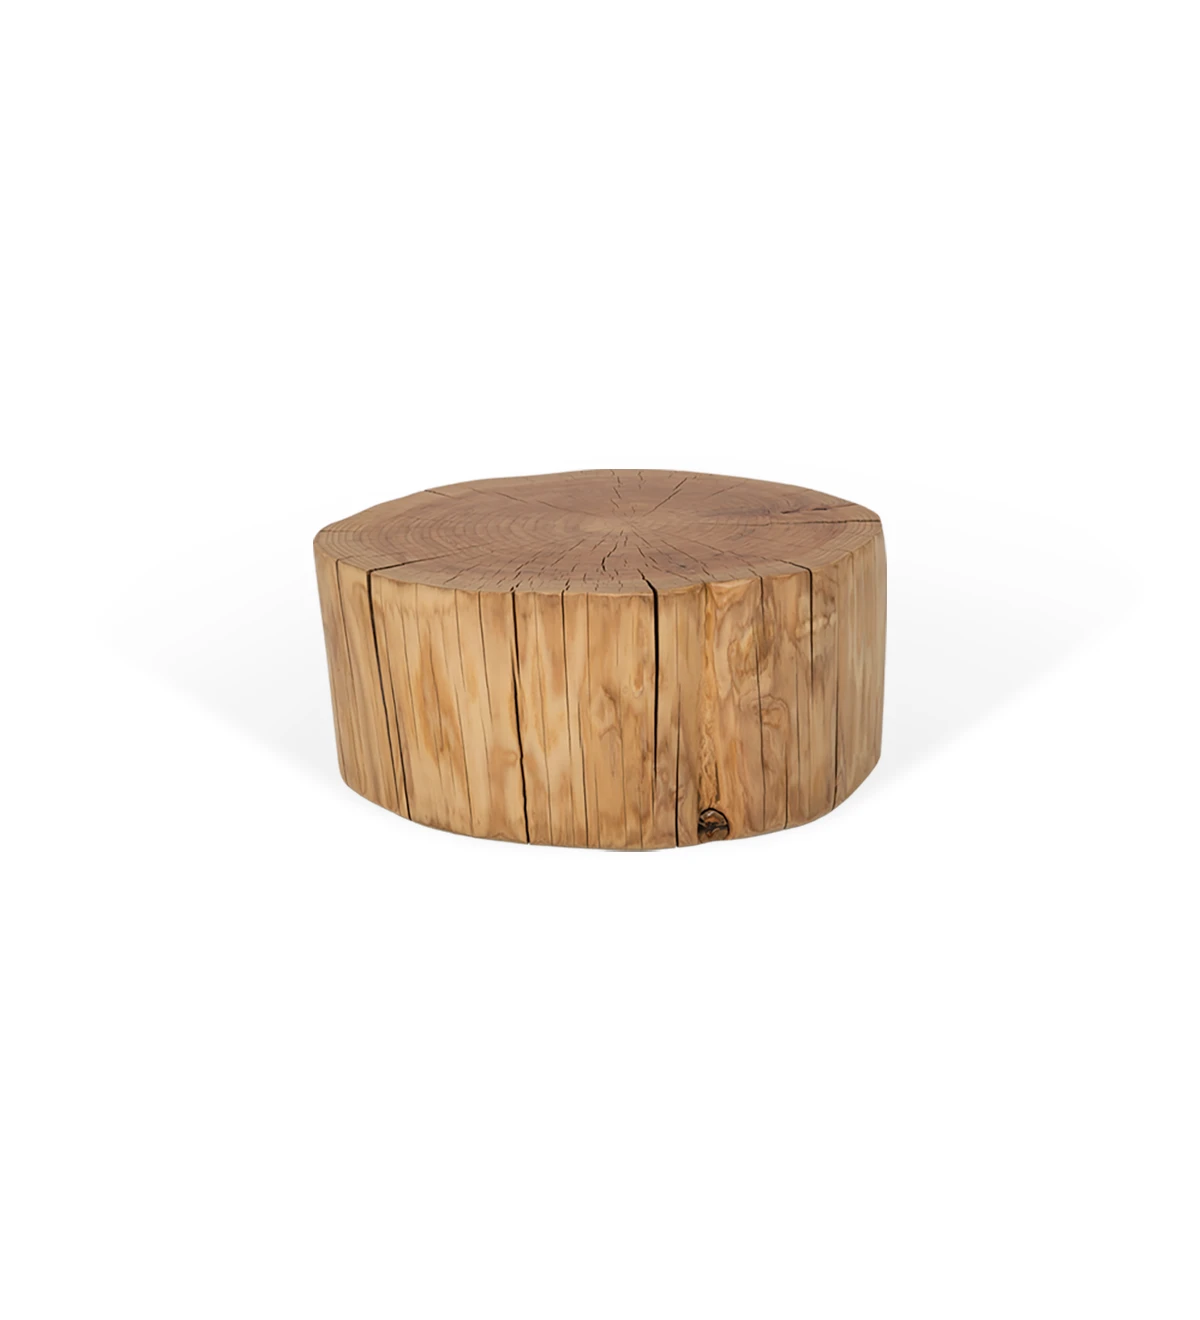 Medium trunk center table in natural cryptomeria wood, Ø 60 to 75 cm.